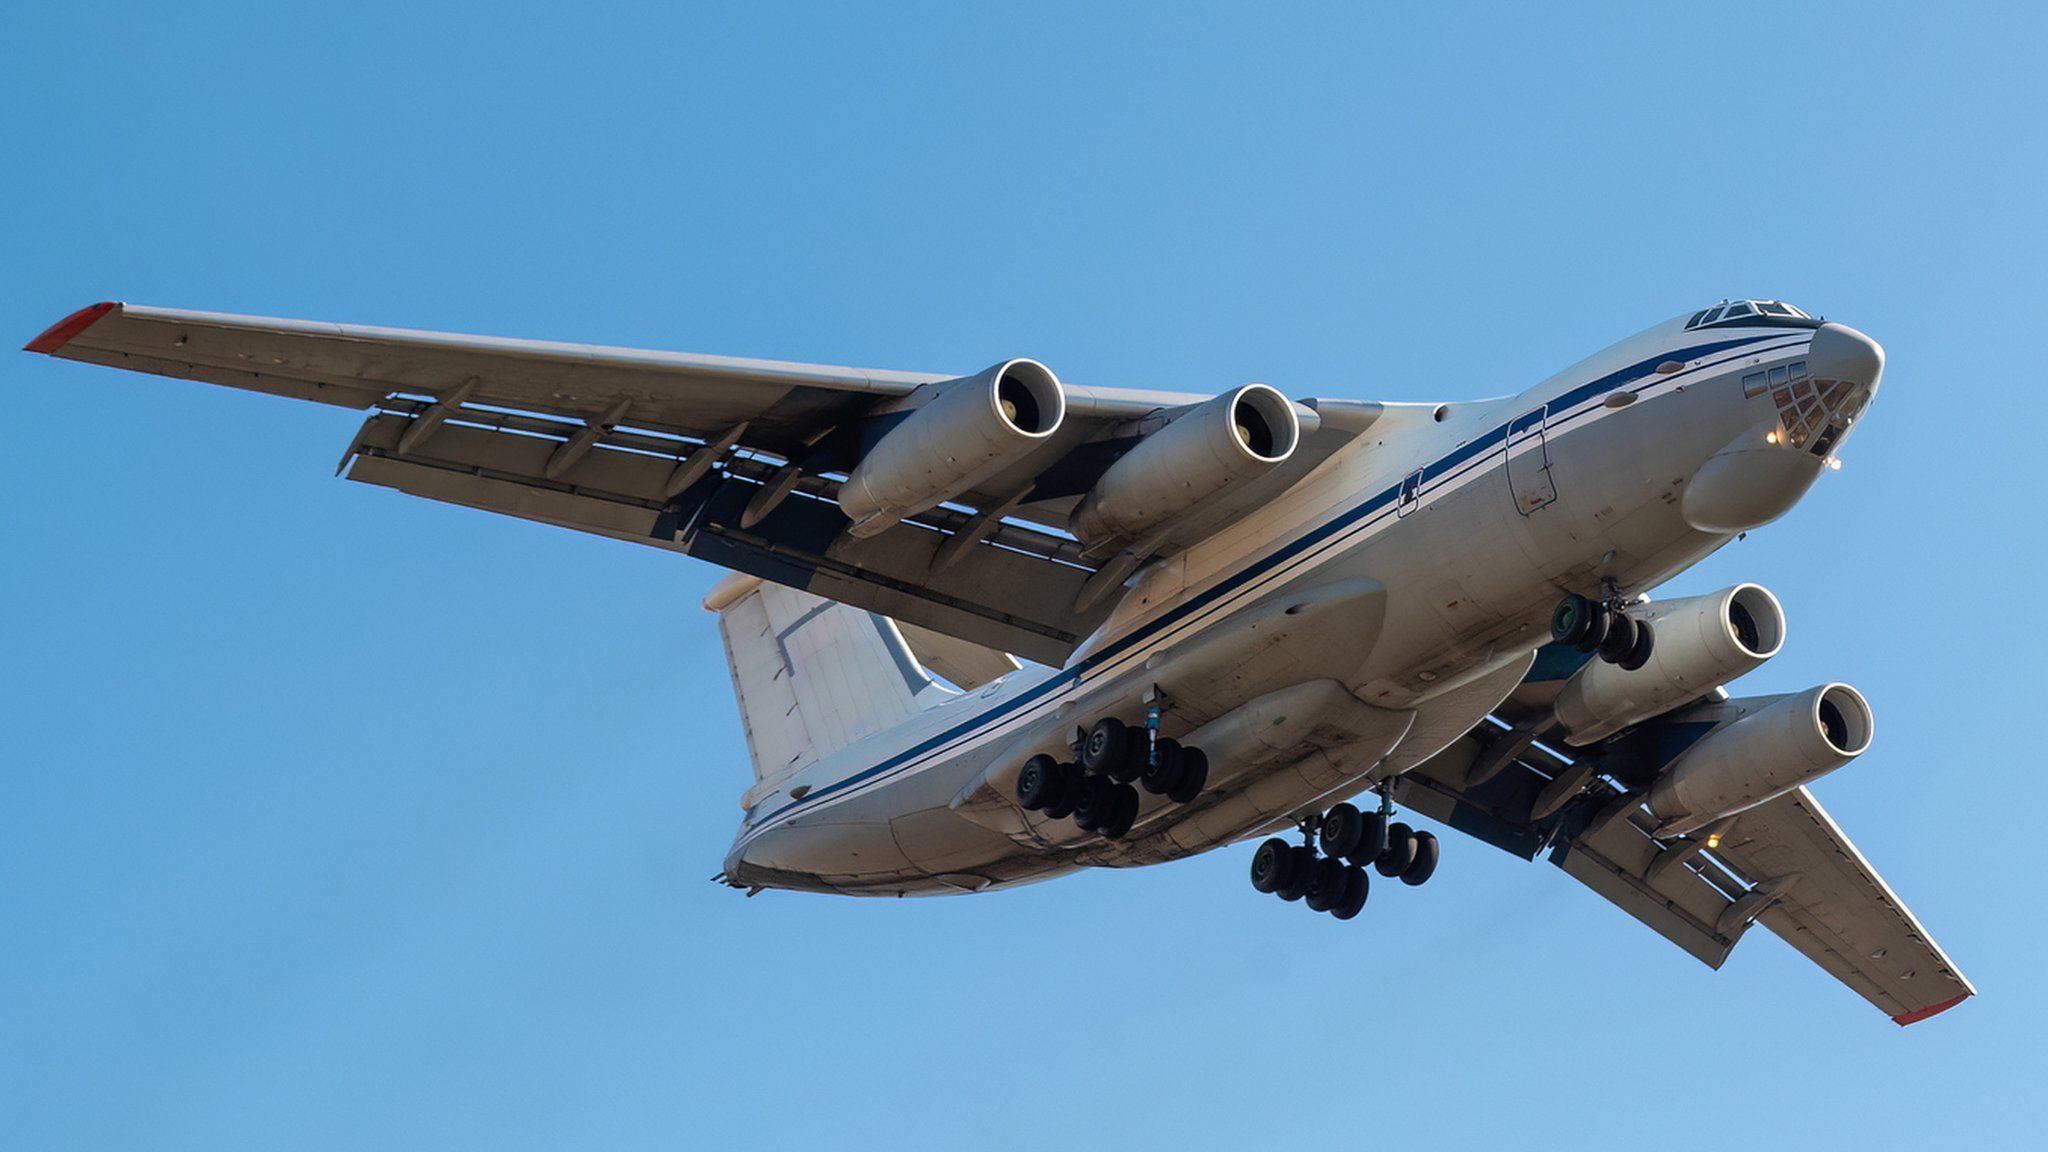 Russian il-76 aircraft in the sky